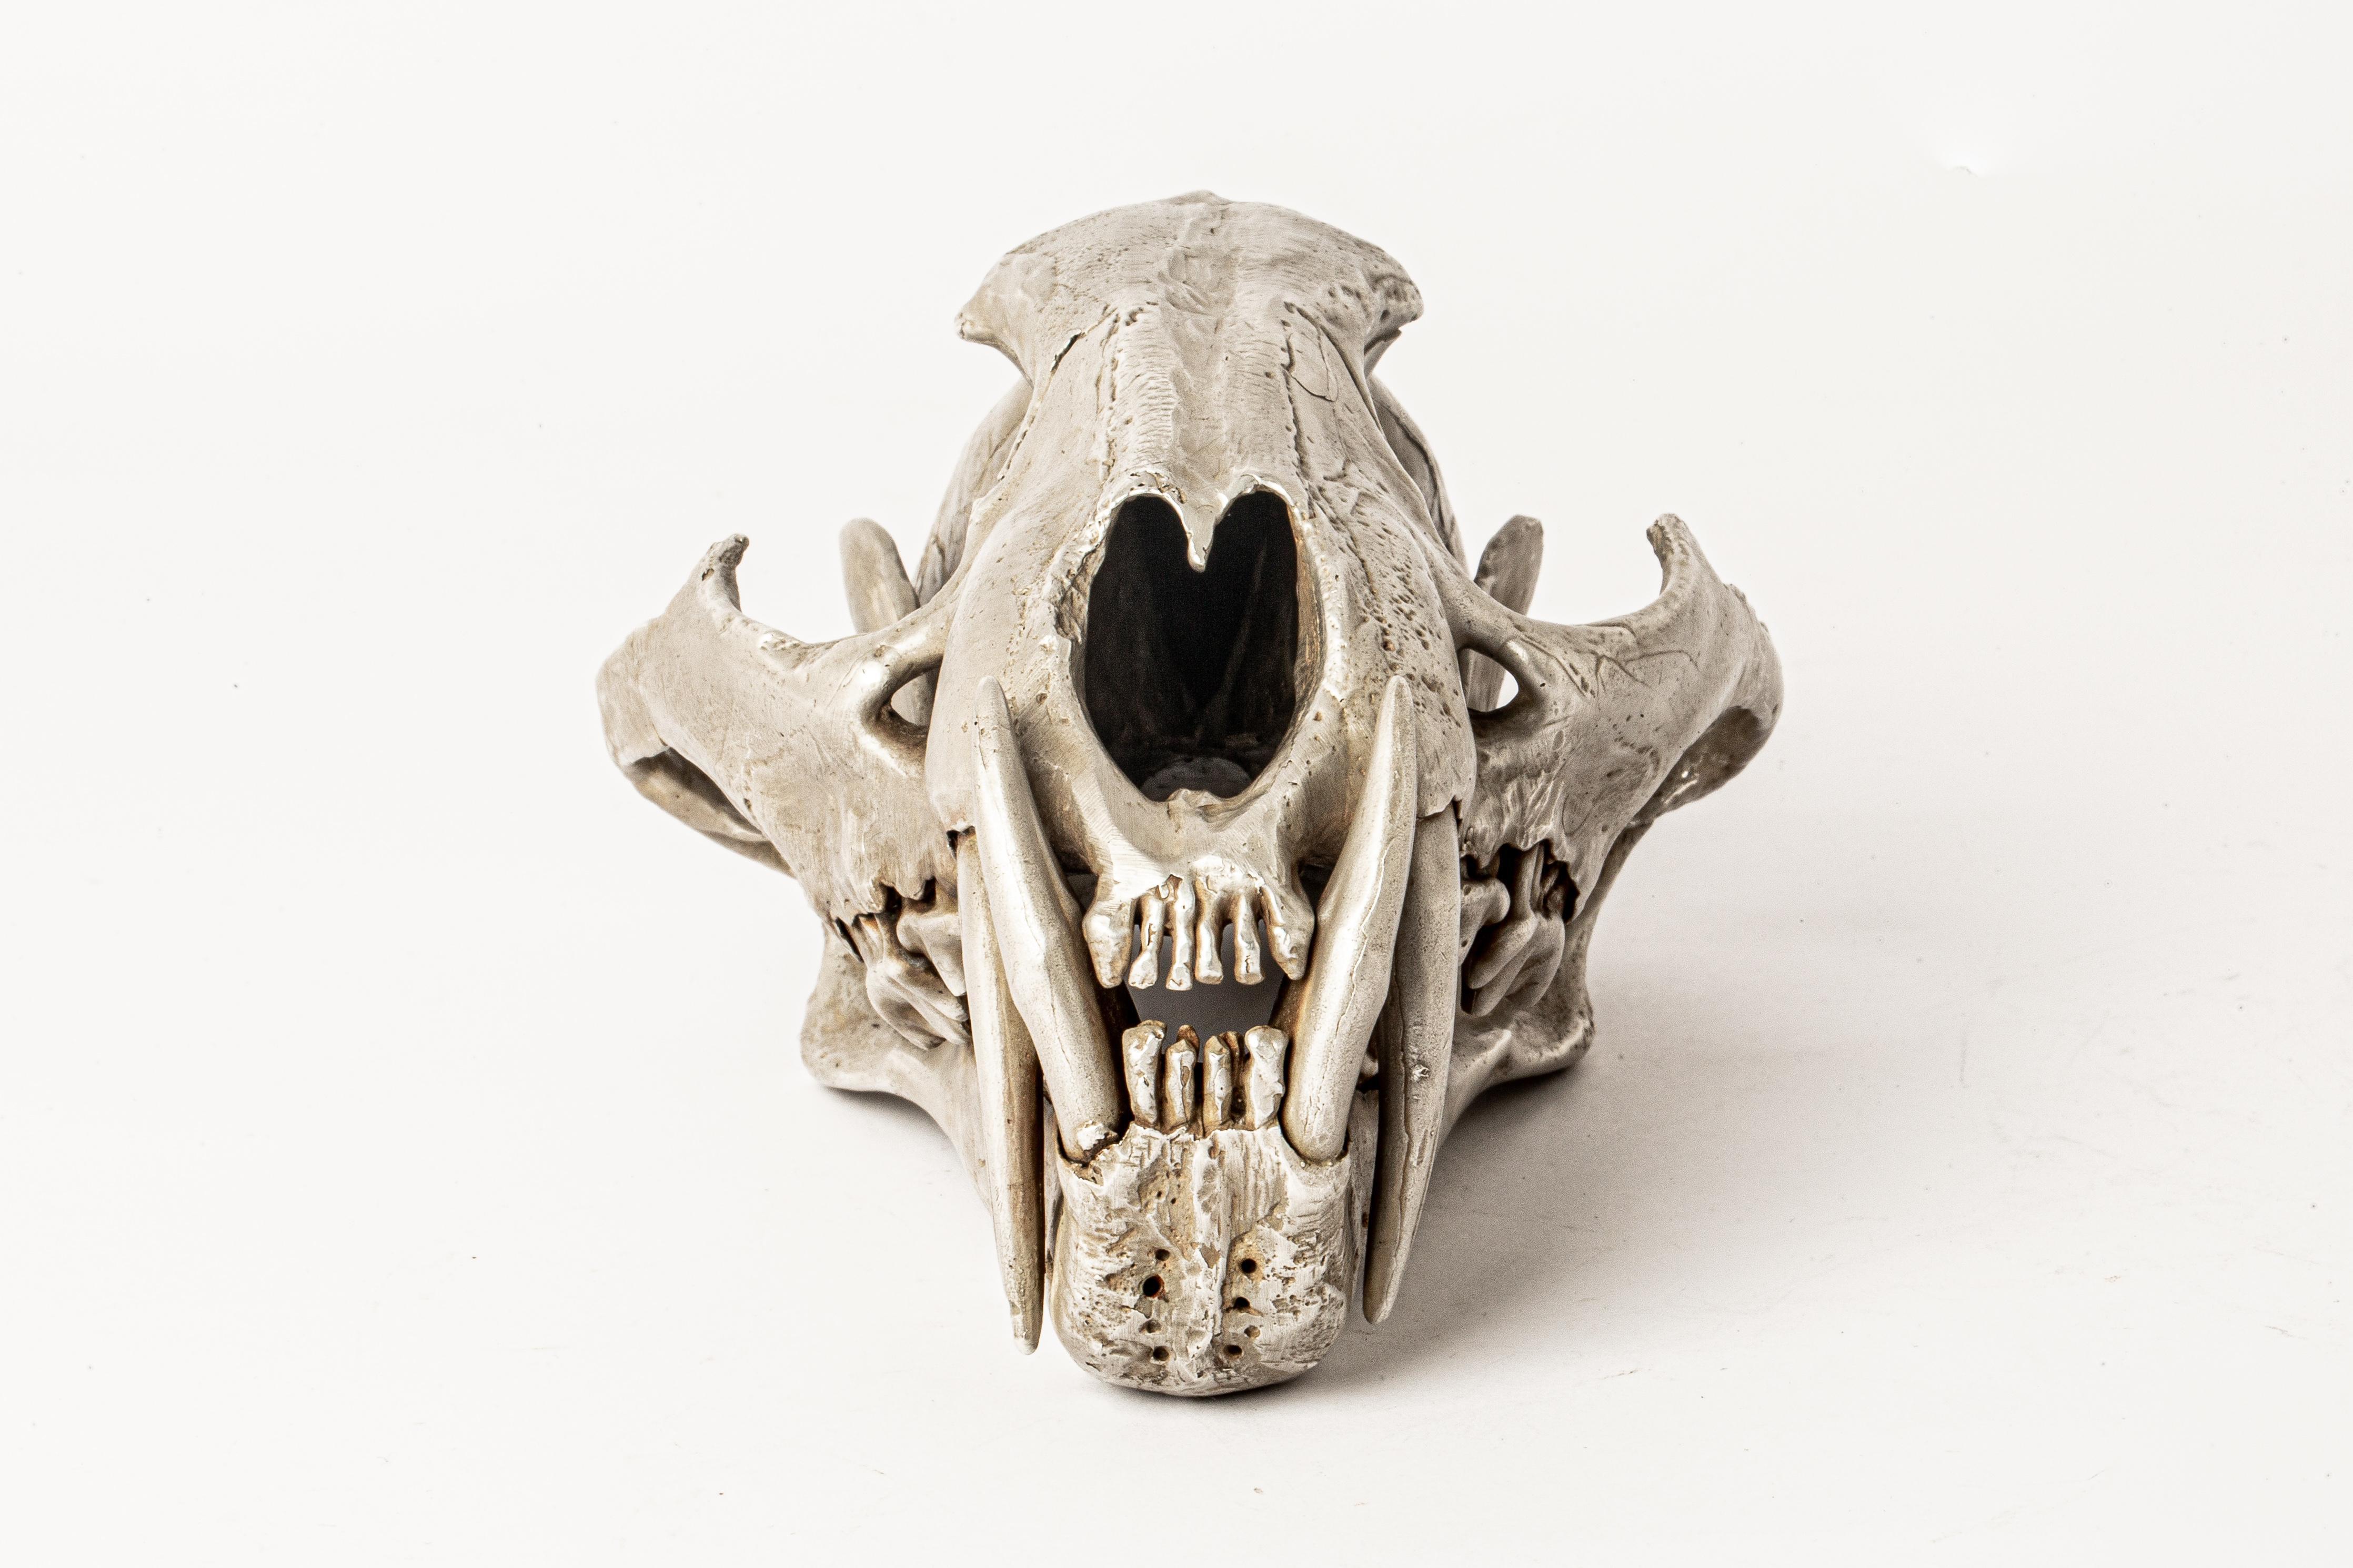 Leopard Skull in brass. It is a striking and intriguing piece of art, capturing the essence of the majestic leopard in a unique and captivating form. Brass substrate is electroplated with silver and then dipped into acid to create the subtly